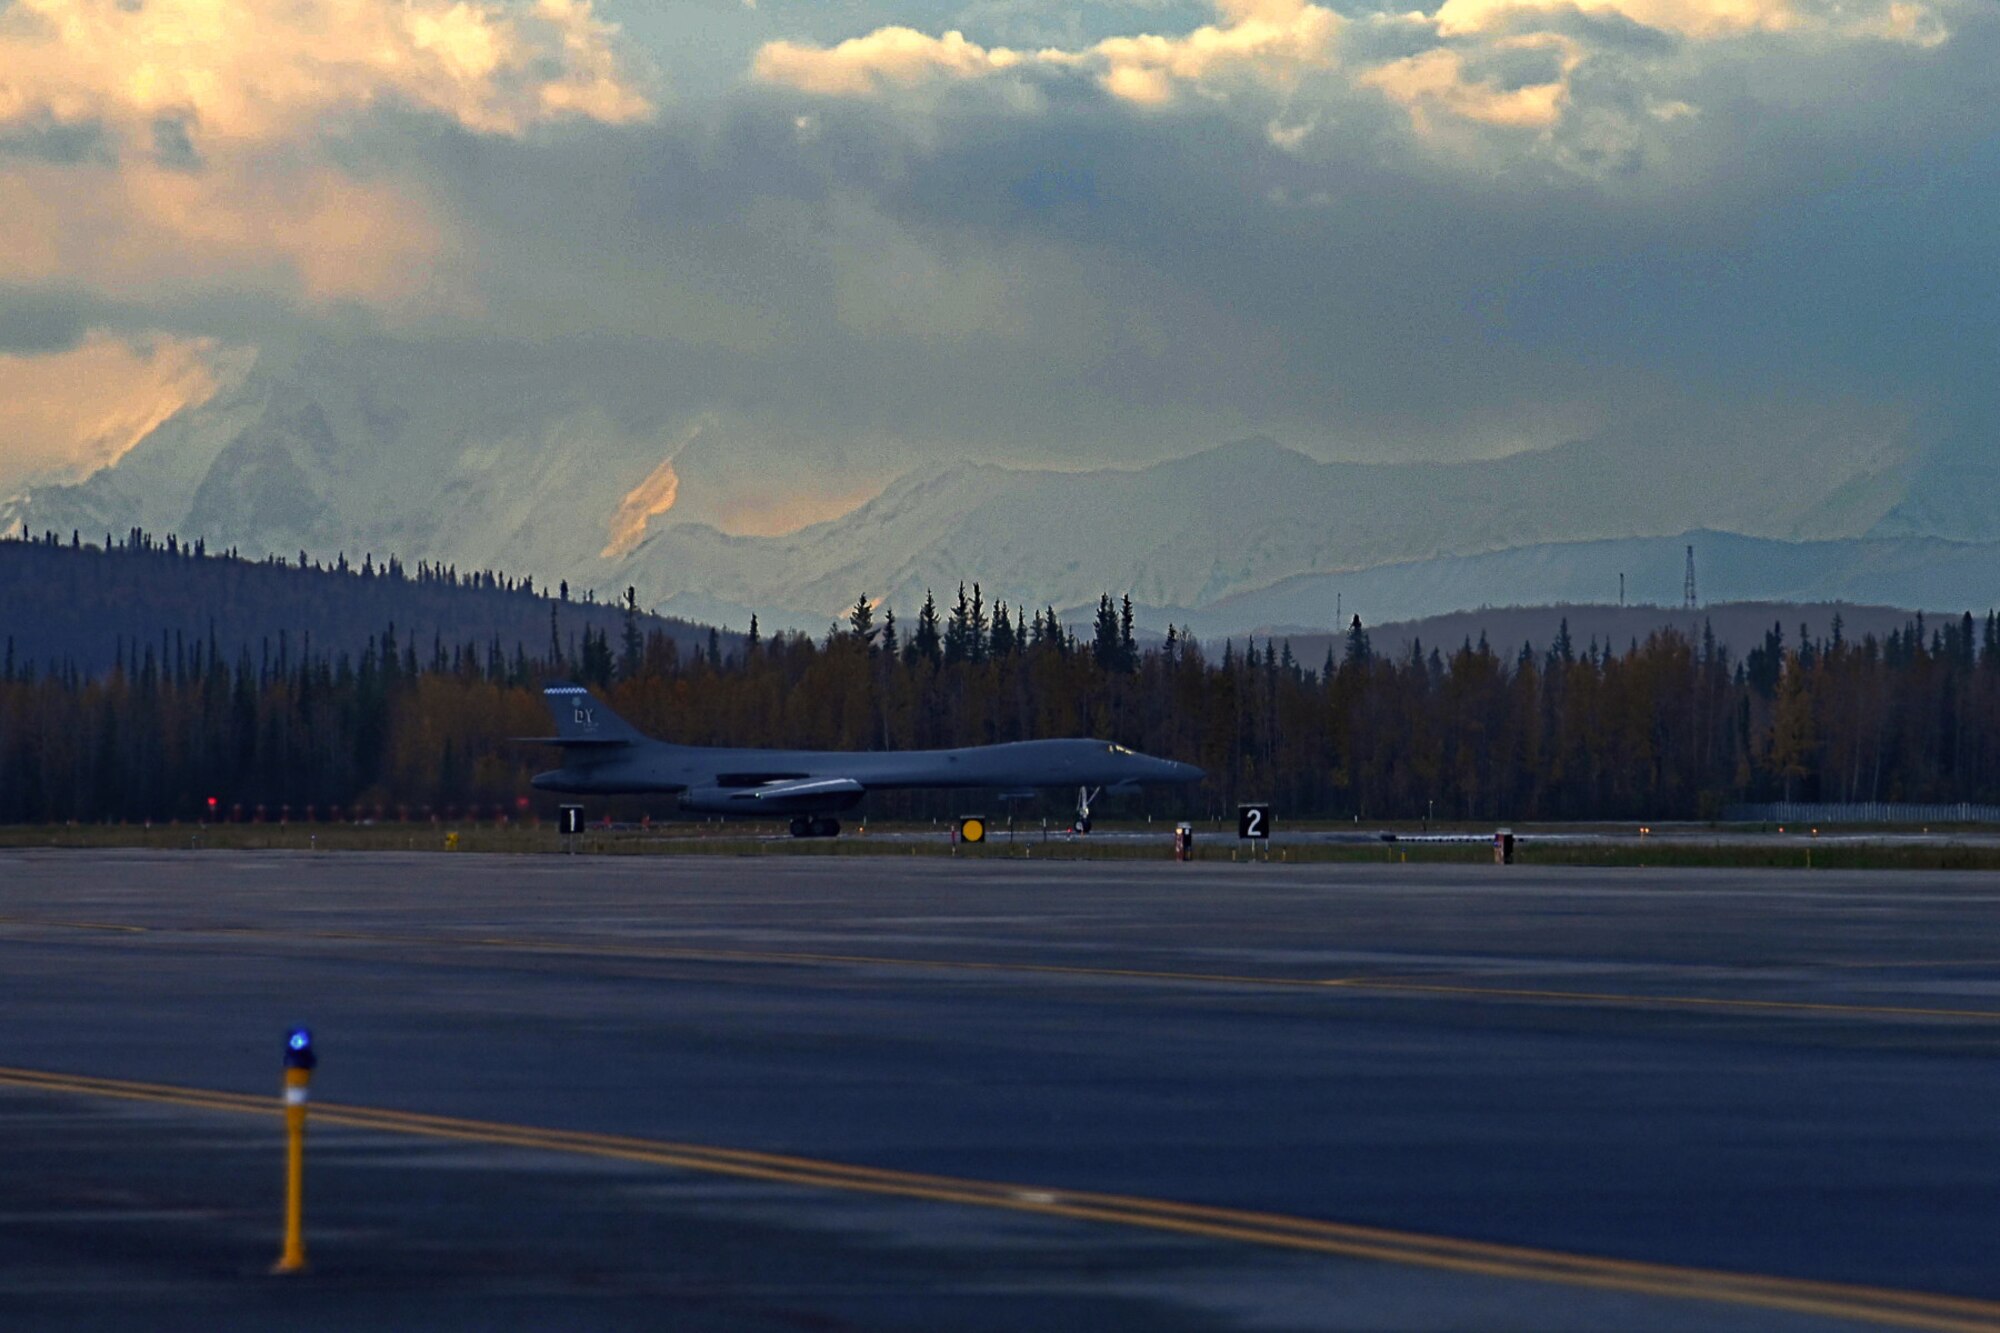 Photo of B-1 with snow-capped mountains in background